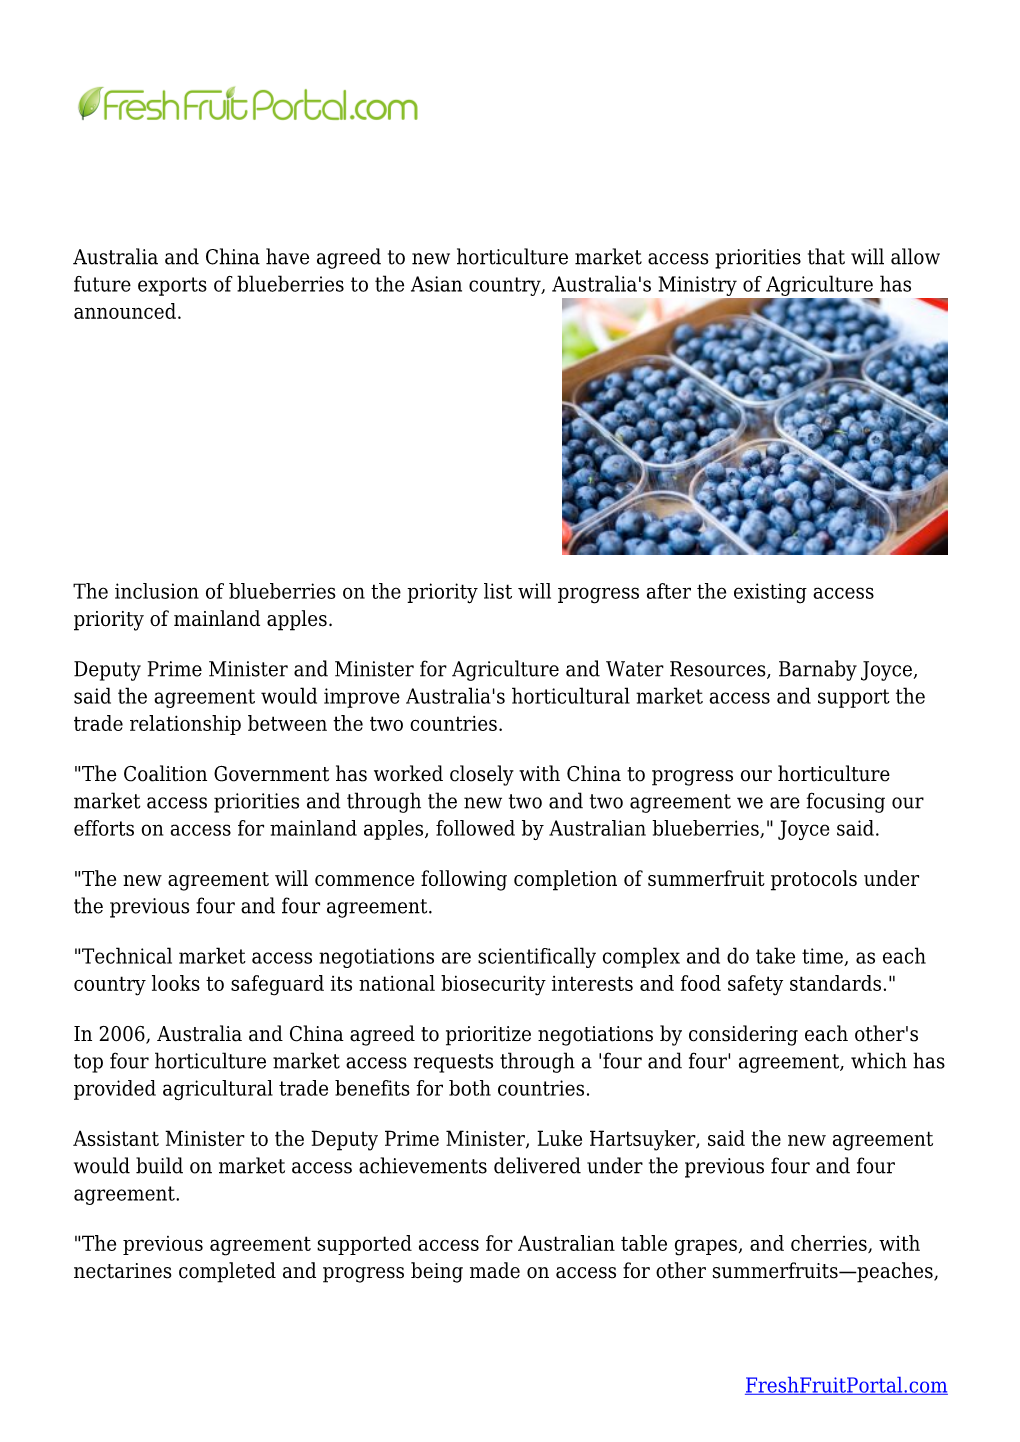 China Agrees to Prioritize Market Access for Australian Blueberries